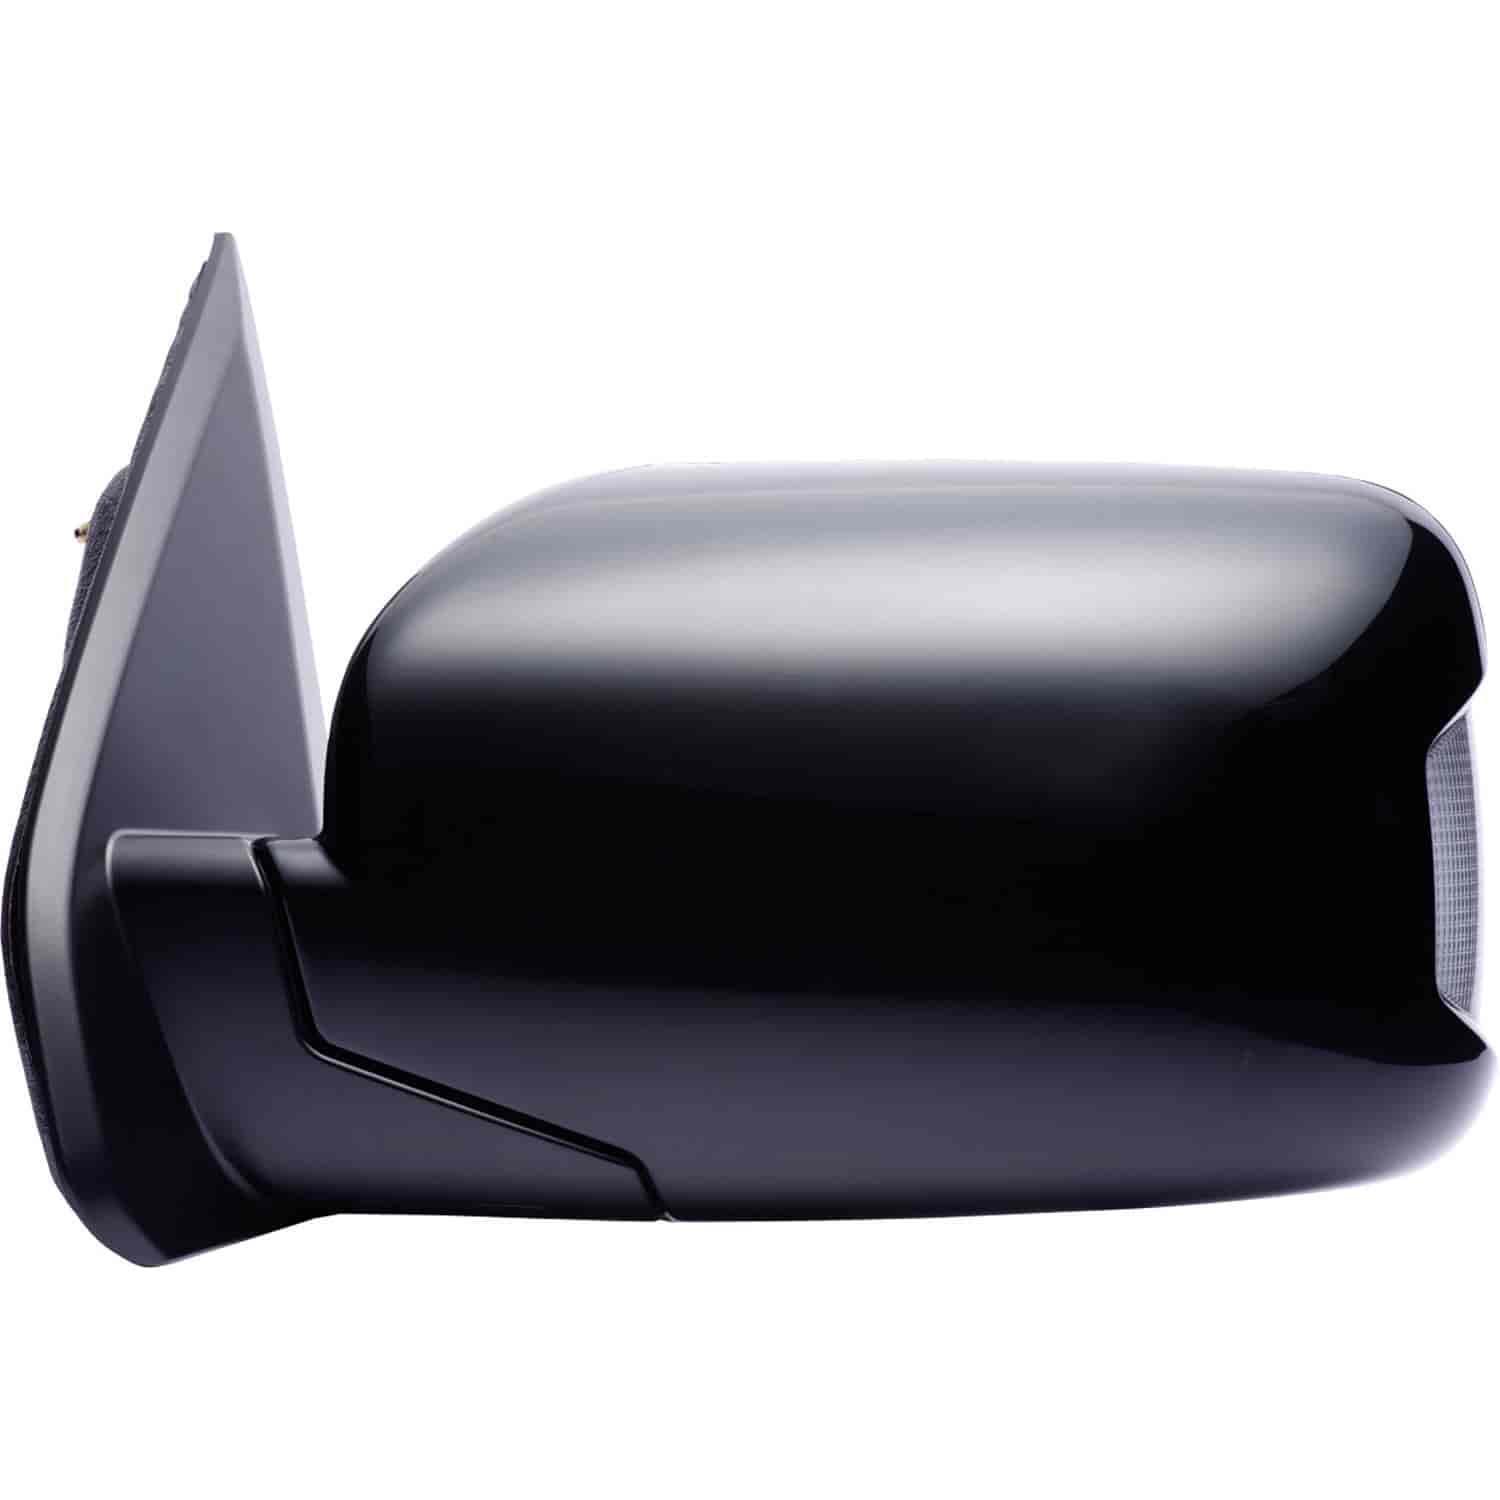 OEM Style Replacement mirror for 09-14 Honda Pilot turn signaemory driver side mirror tested to fit